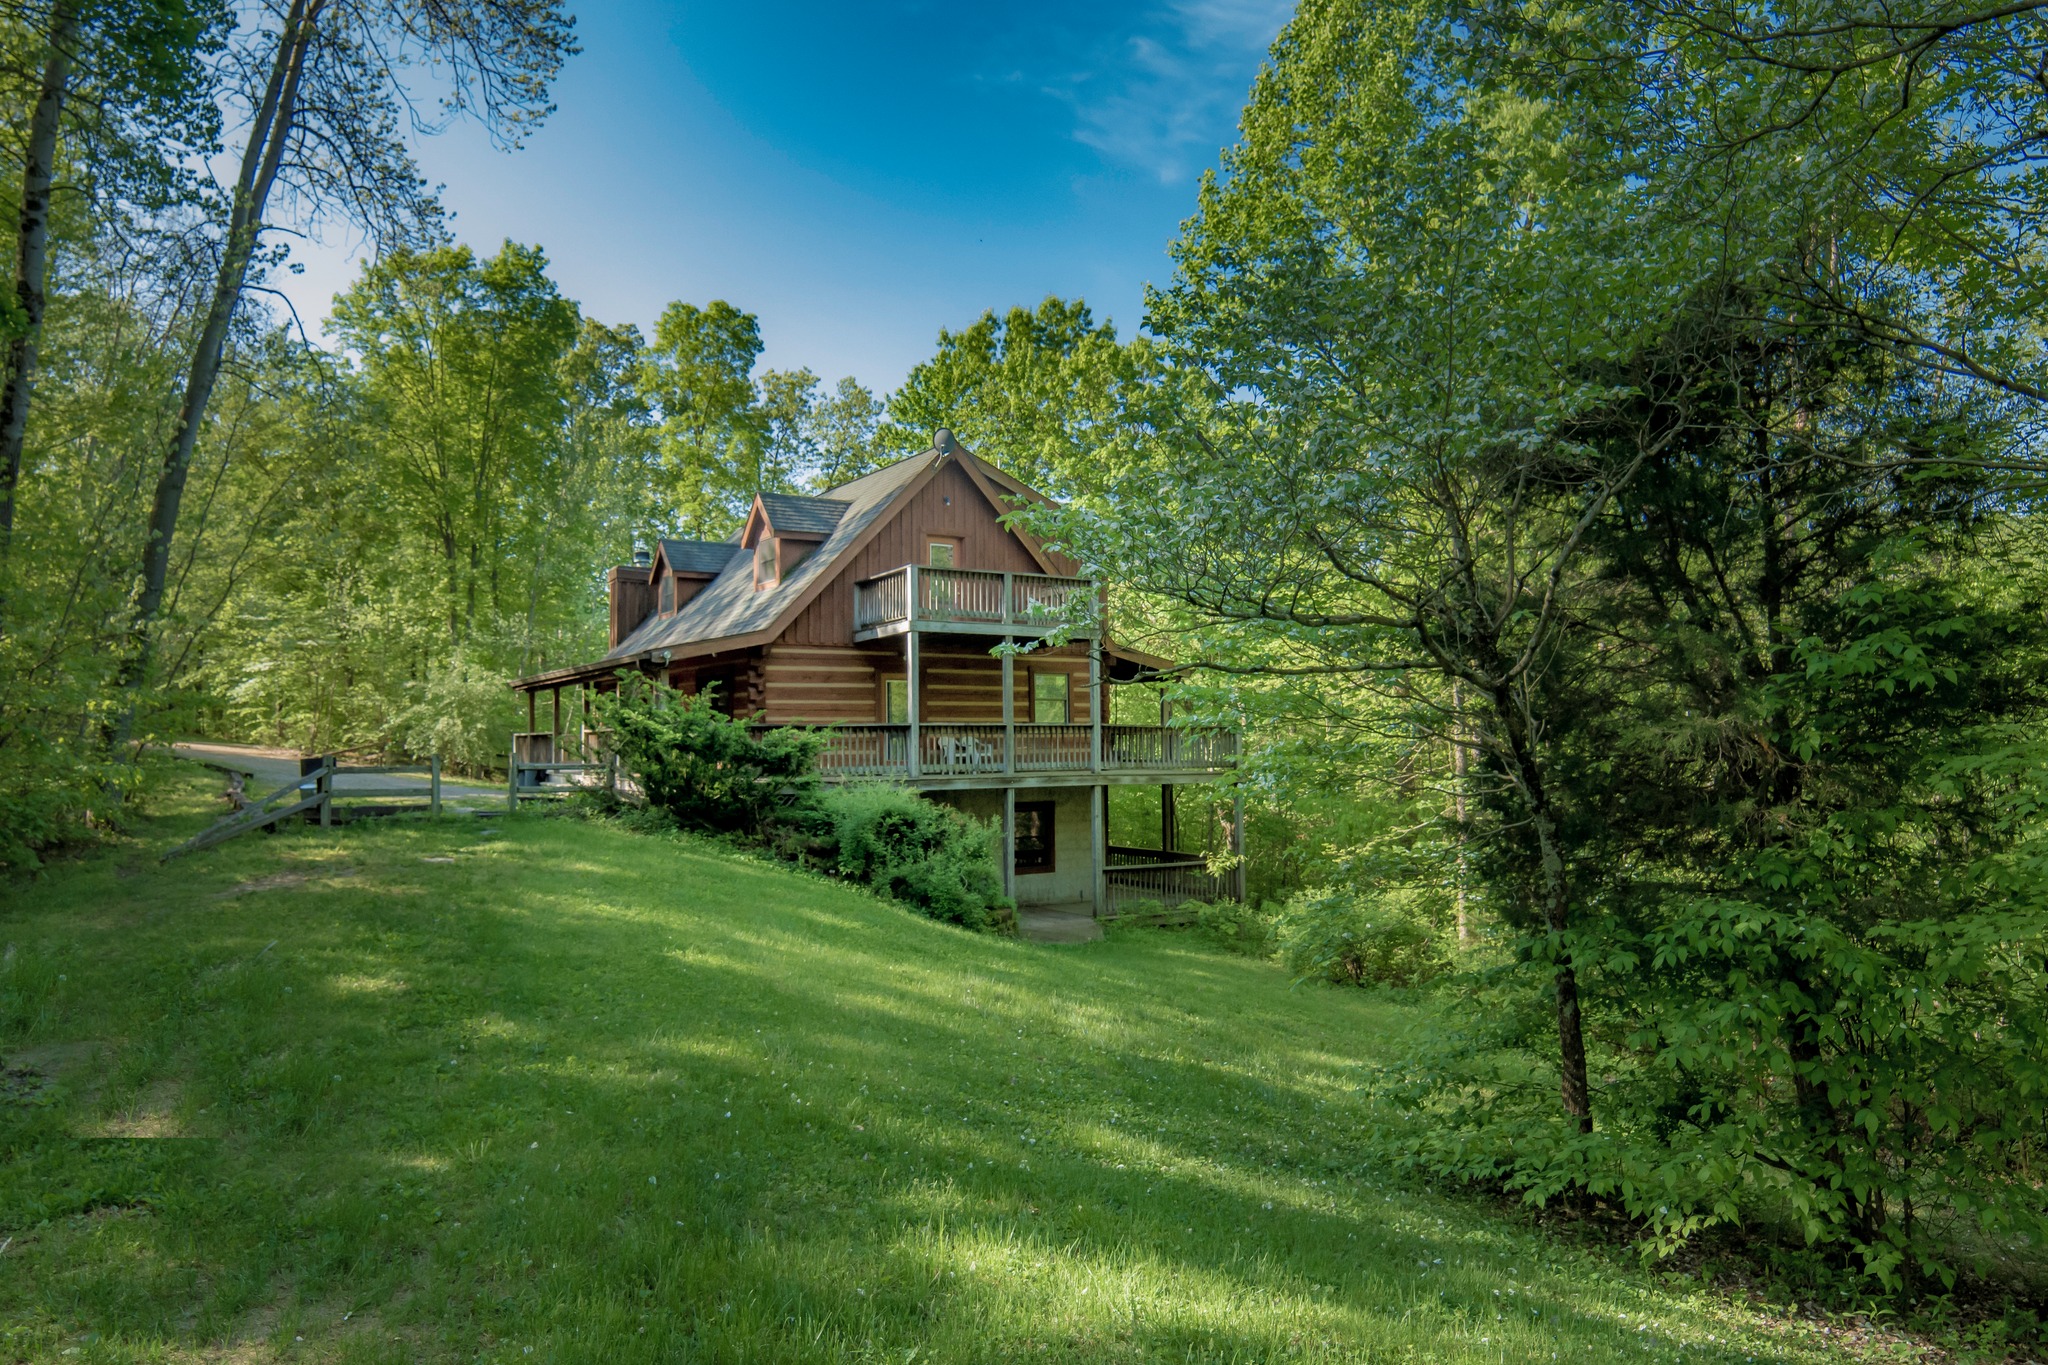 Back To Nature Treehouse Cabins Indiana